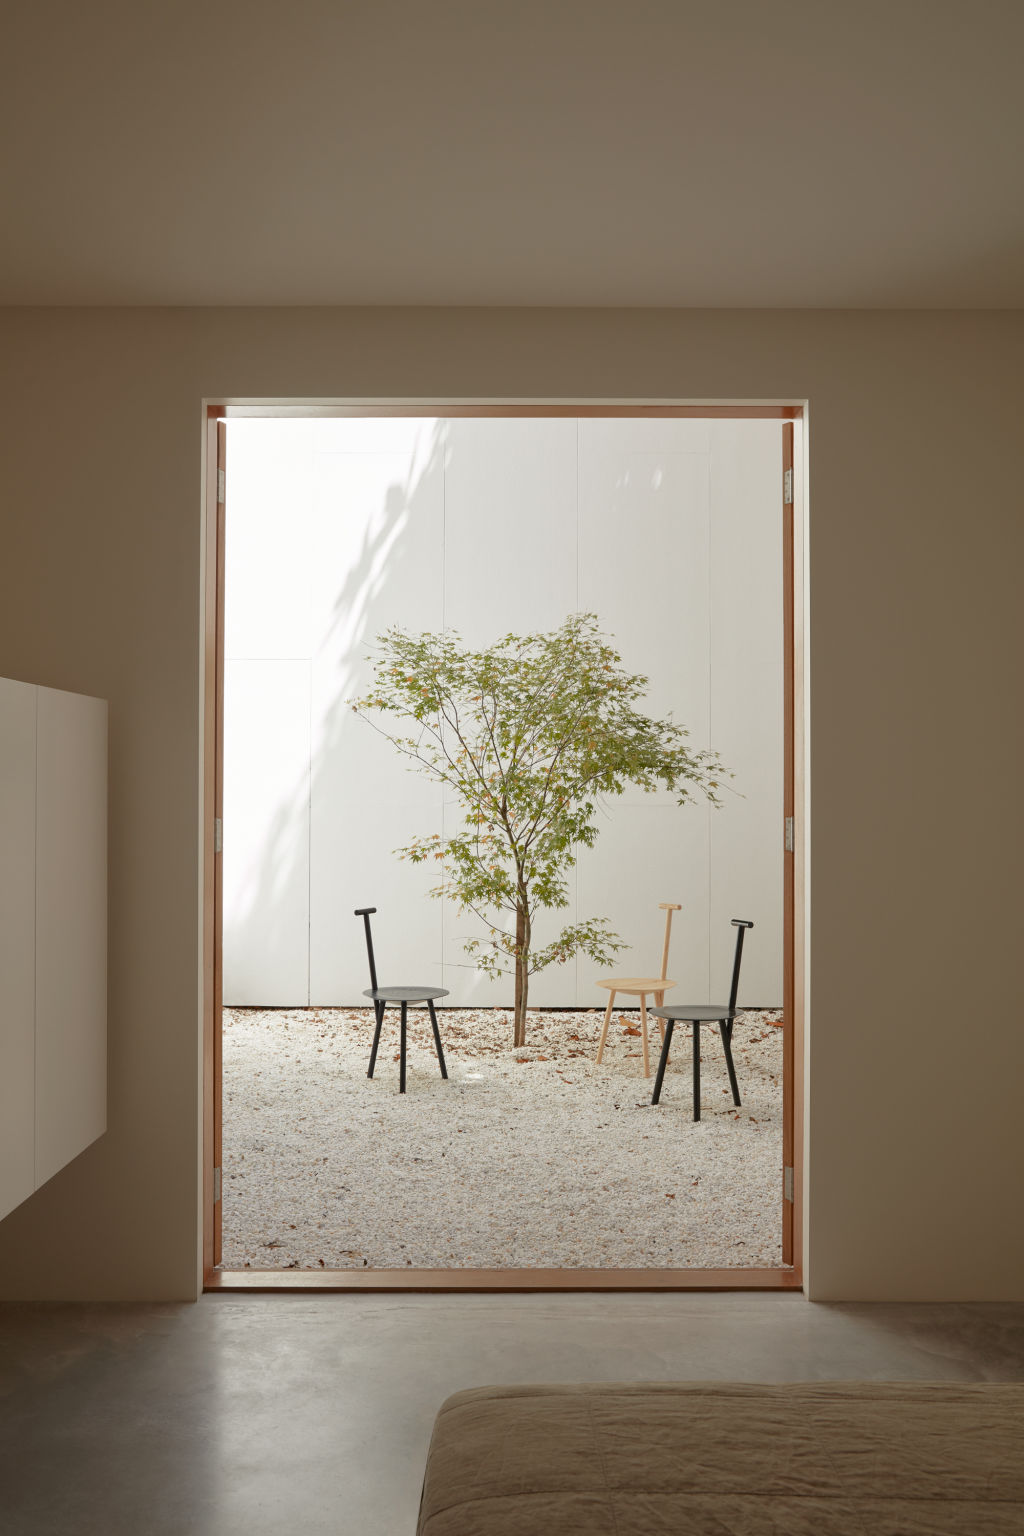 Clever design means there's enough room for a meditative courtyard, which helps bring fresh air inside the skinny home. Photo: Tom Ross